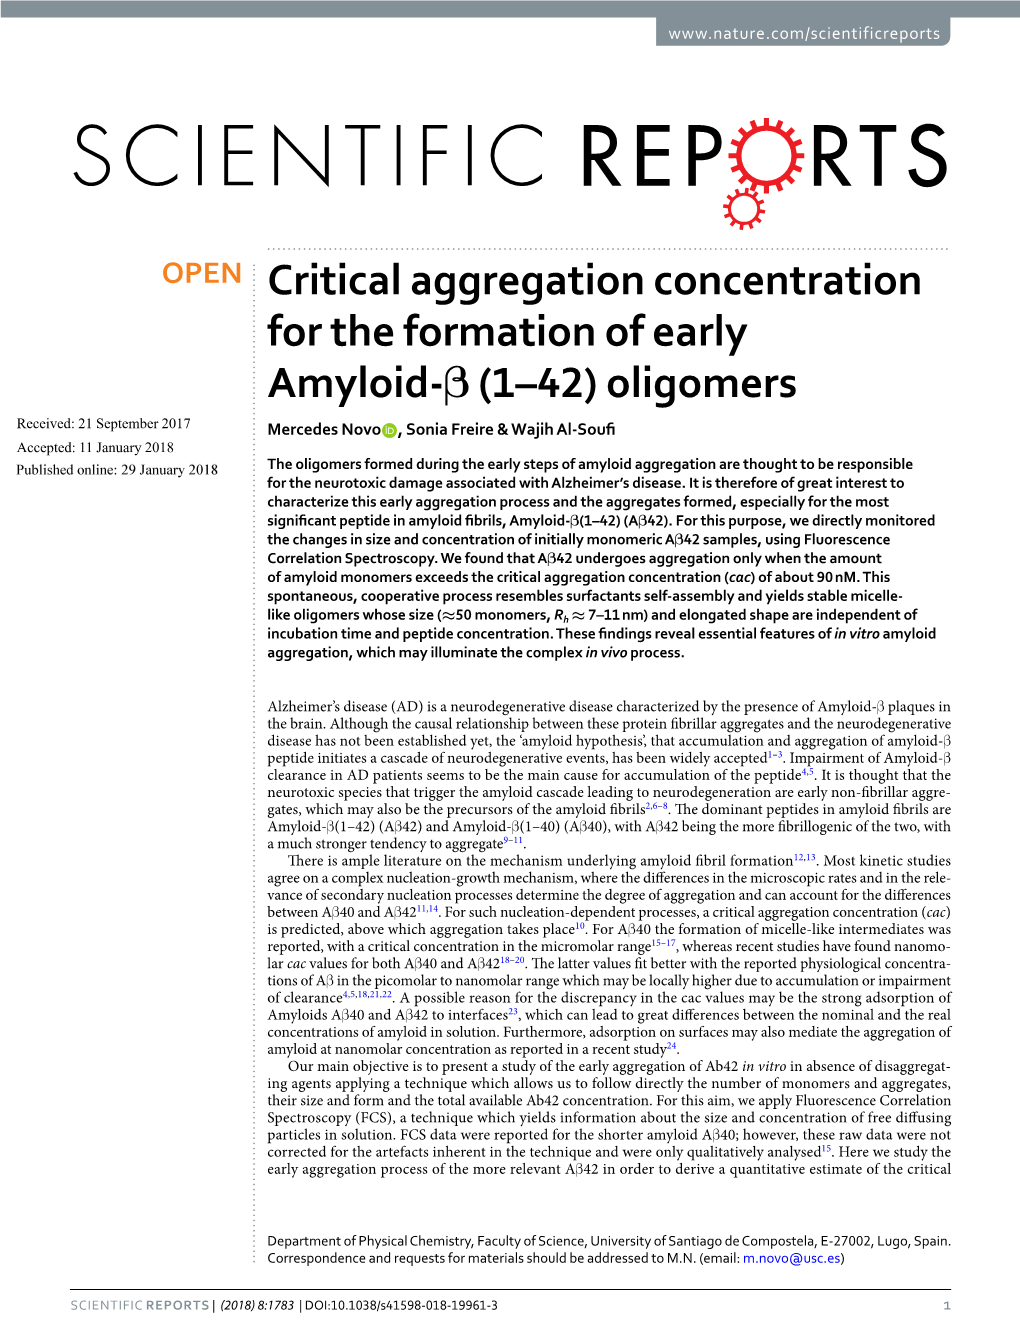 Critical Aggregation Concentration for the Formation of Early